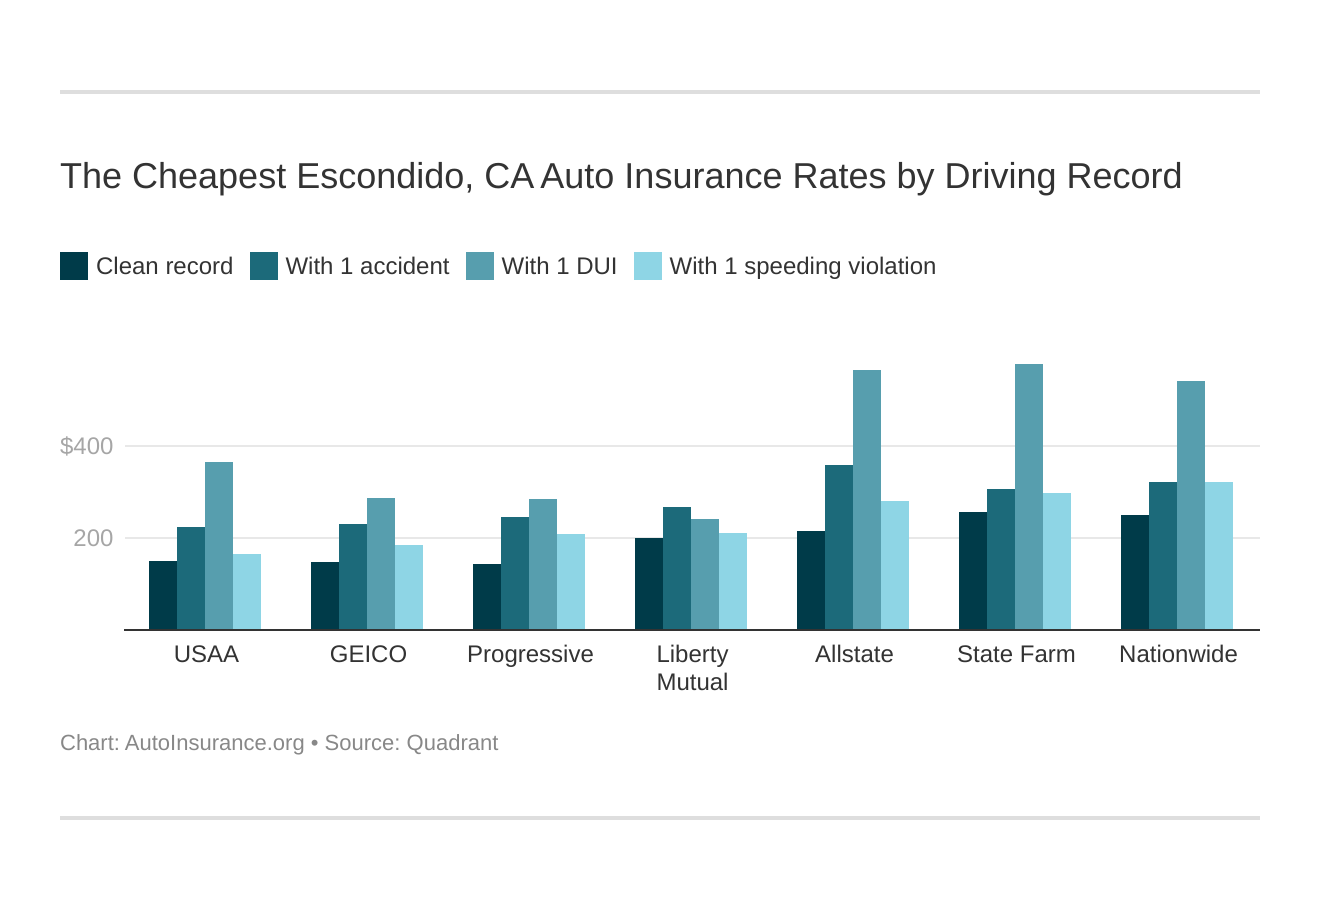 The Cheapest Escondido, CA Auto Insurance Rates by Driving Record